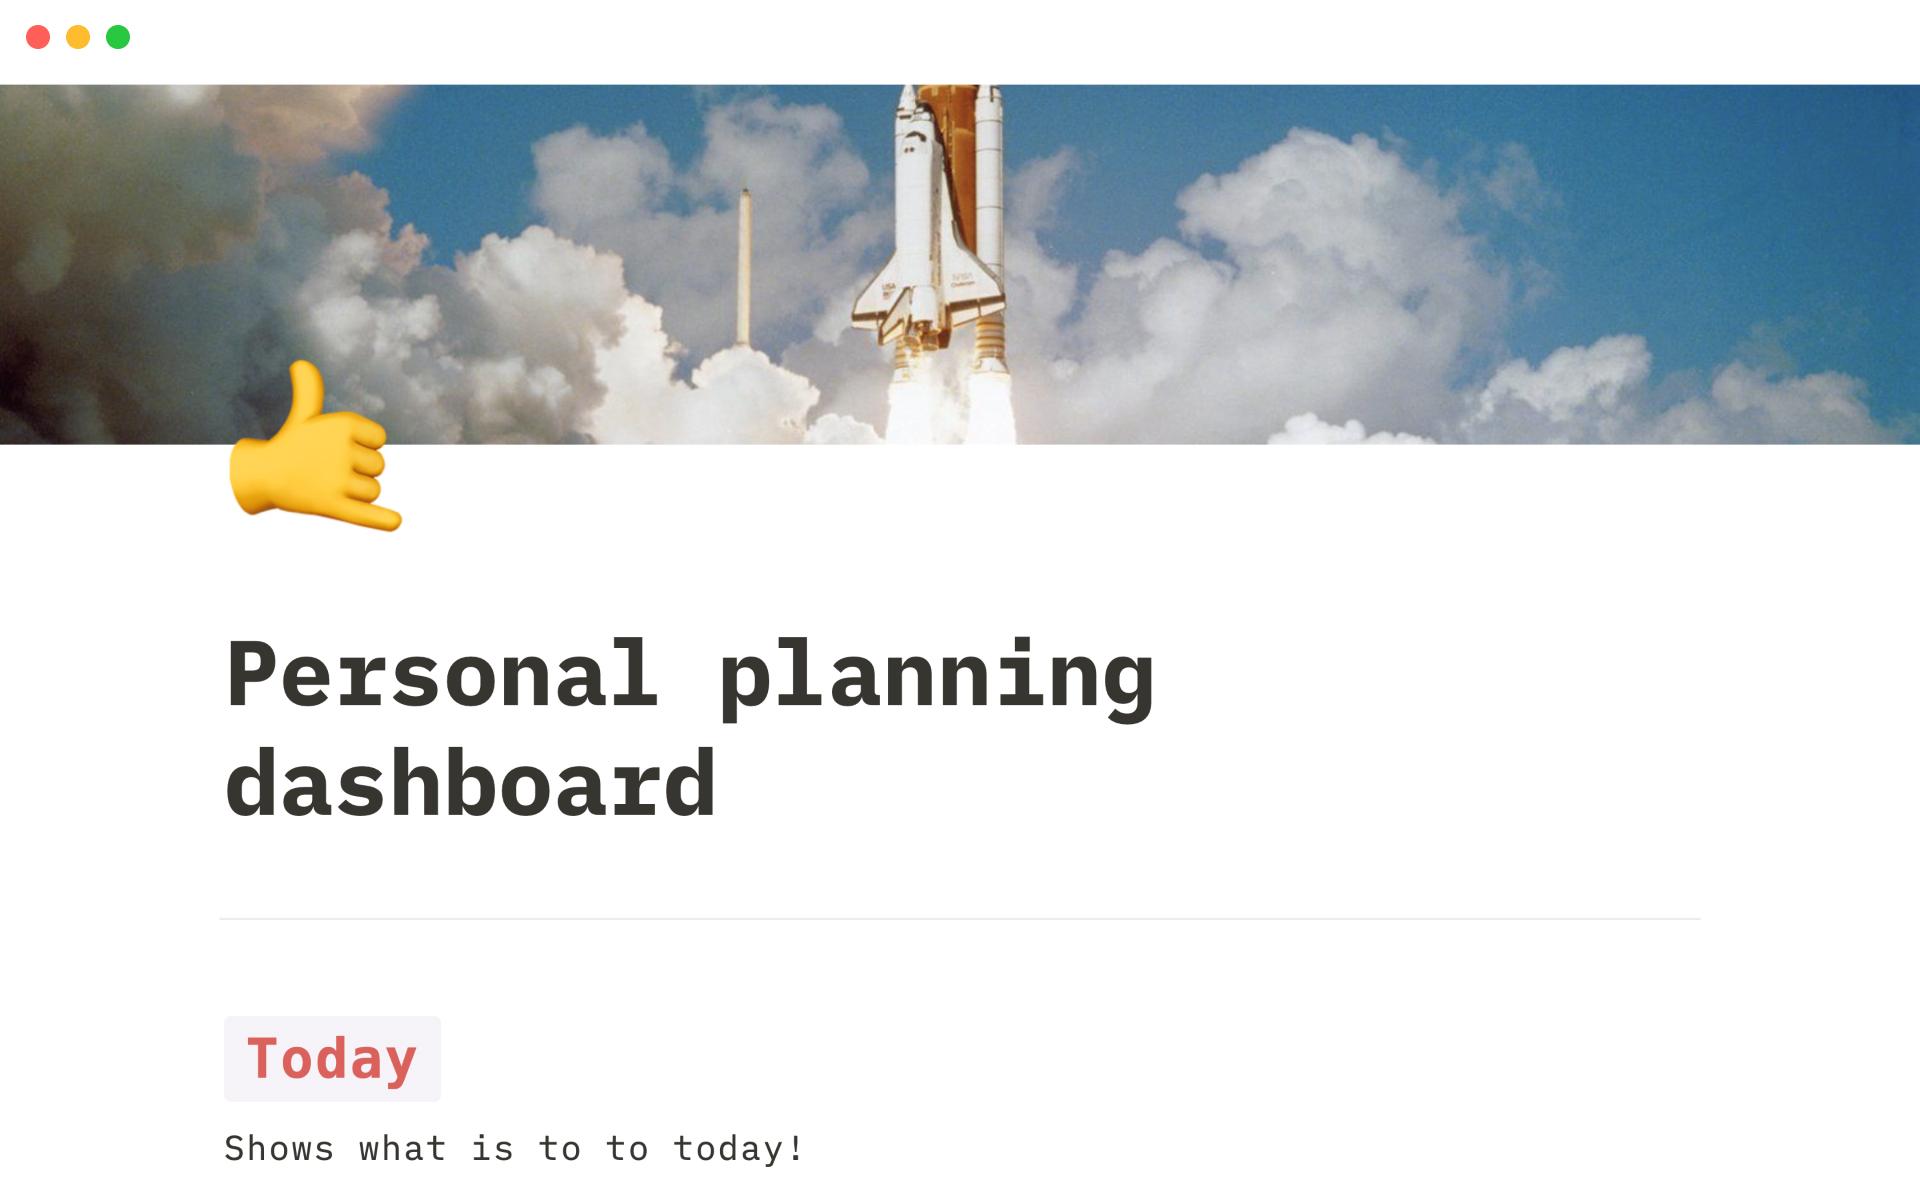 Personal planning dashboard focus on a small but important thing - managing your plan. It allows you to lay out all your projects and tasks, set deadlines, focus on what's due today.